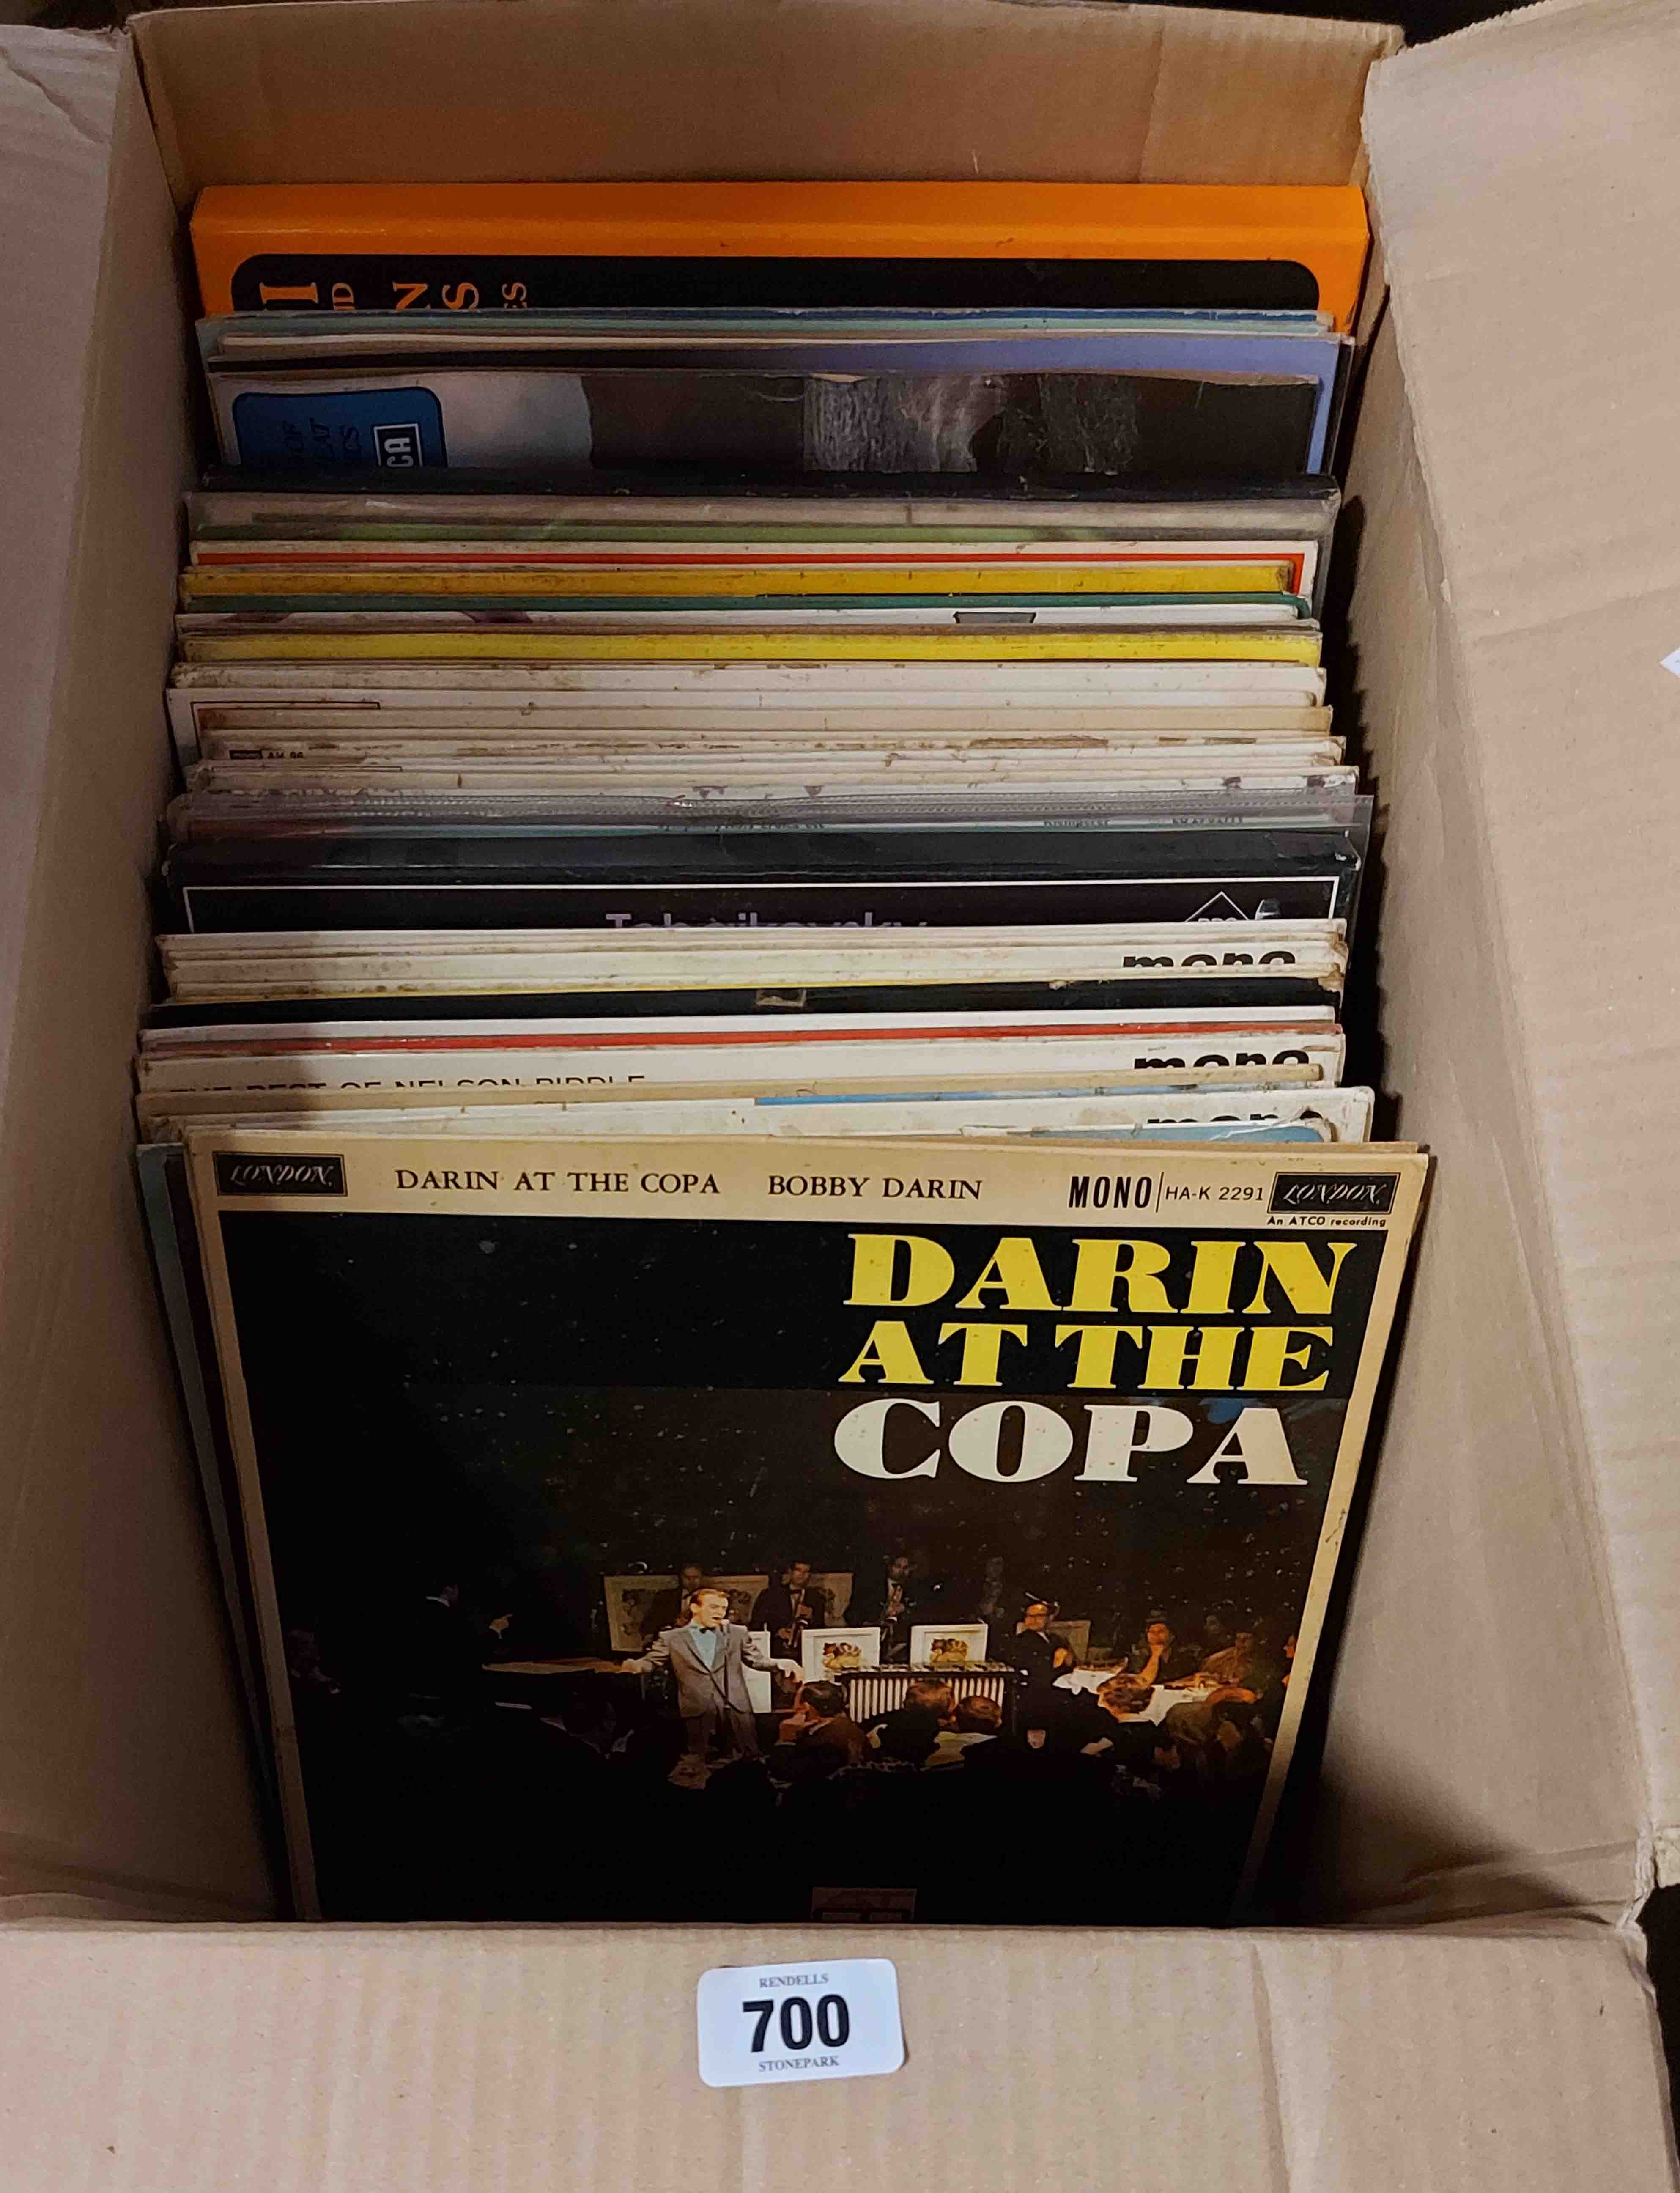 A box containing LP records including Bobby Darrin at the Copa, etc.